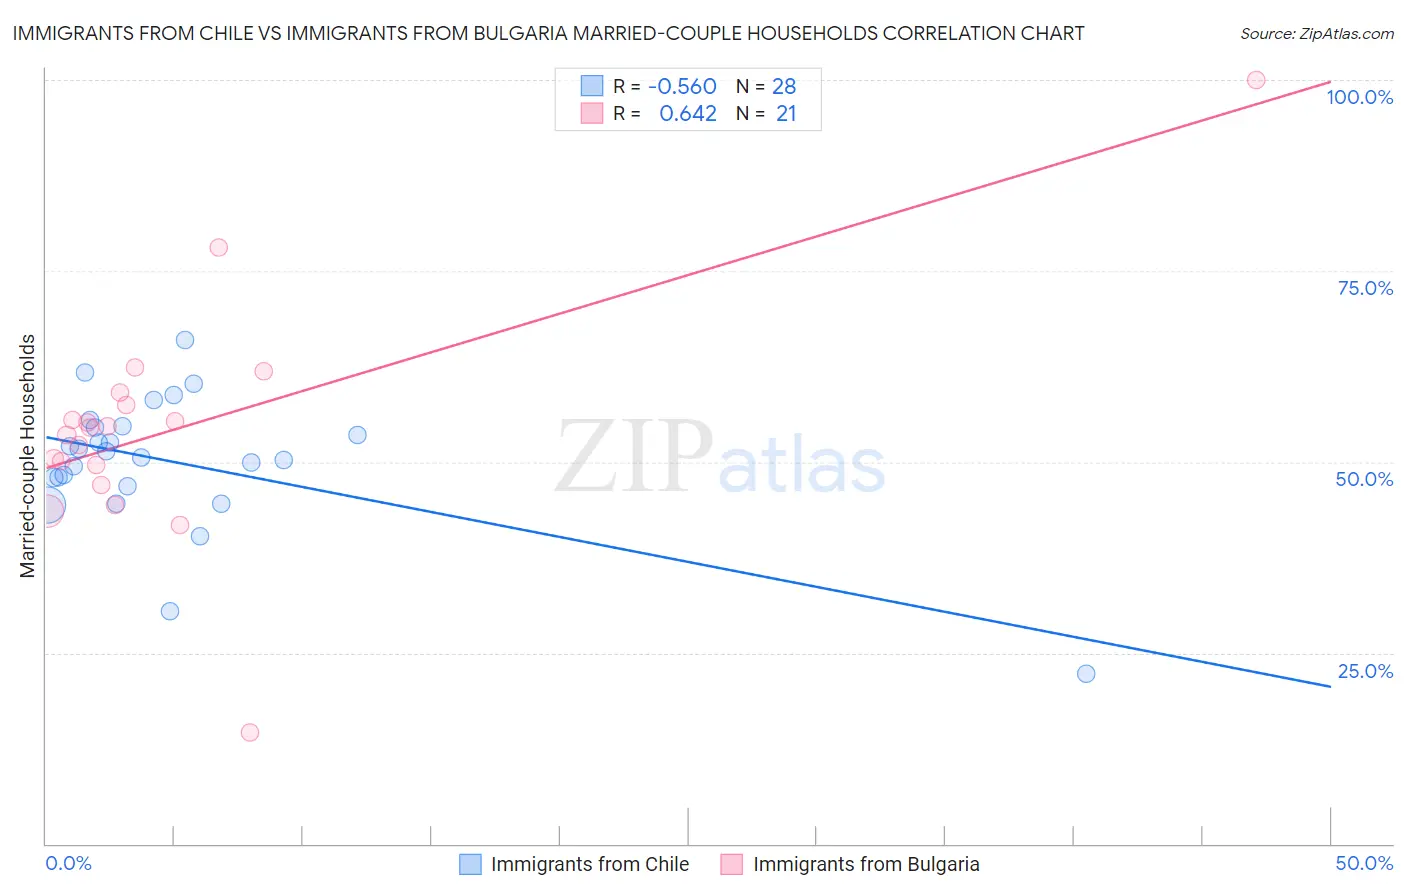 Immigrants from Chile vs Immigrants from Bulgaria Married-couple Households